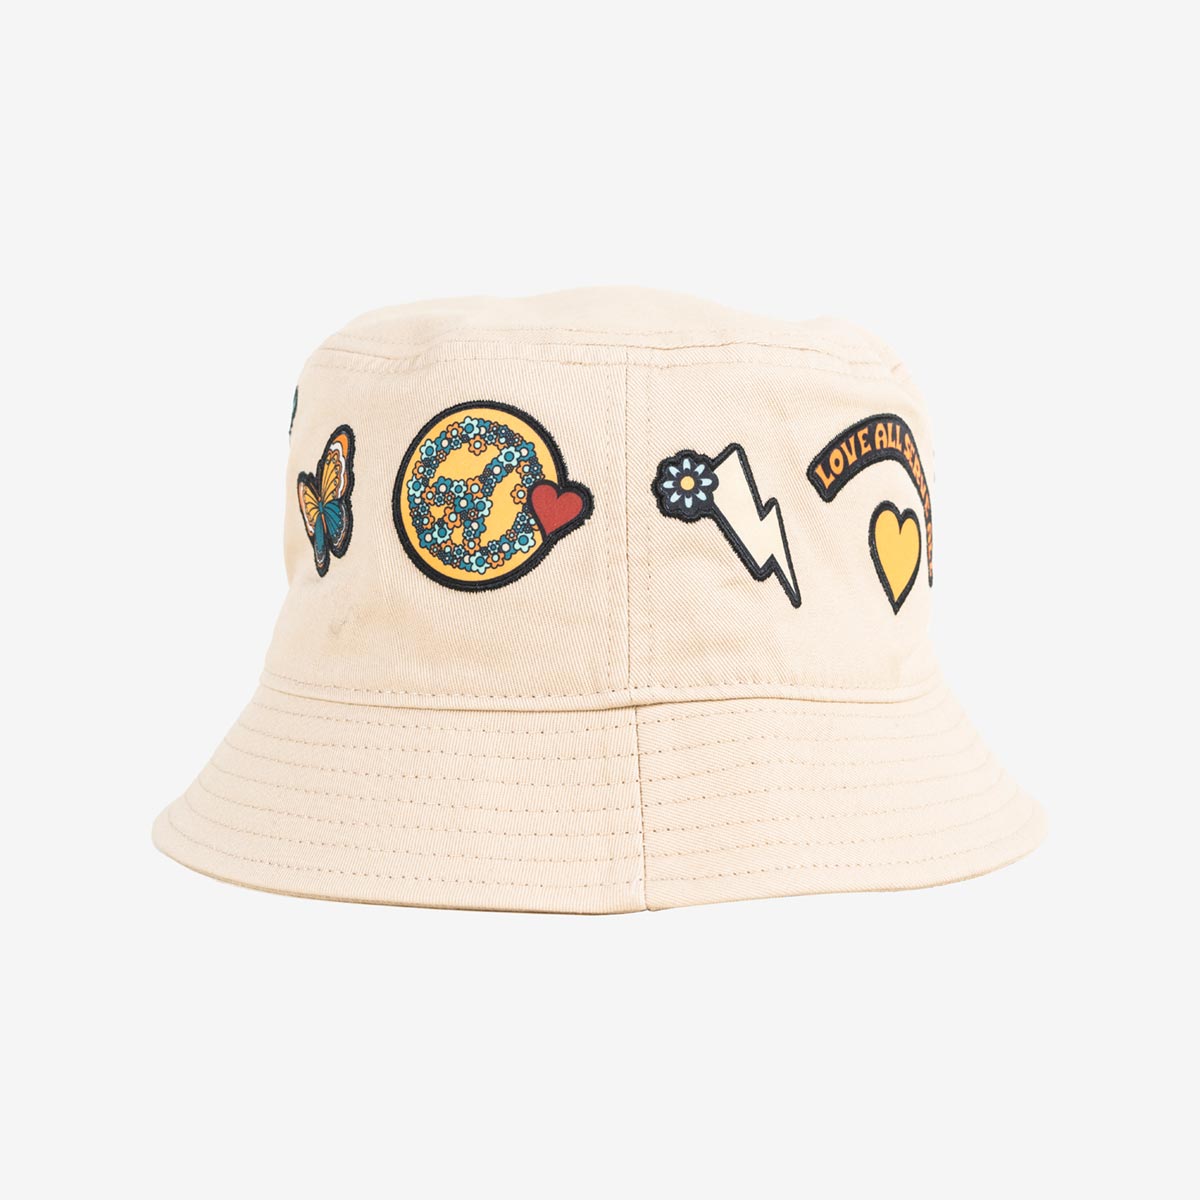 Hard Rock Music Festival Bucket Hat with Patches in Khaki image number 4